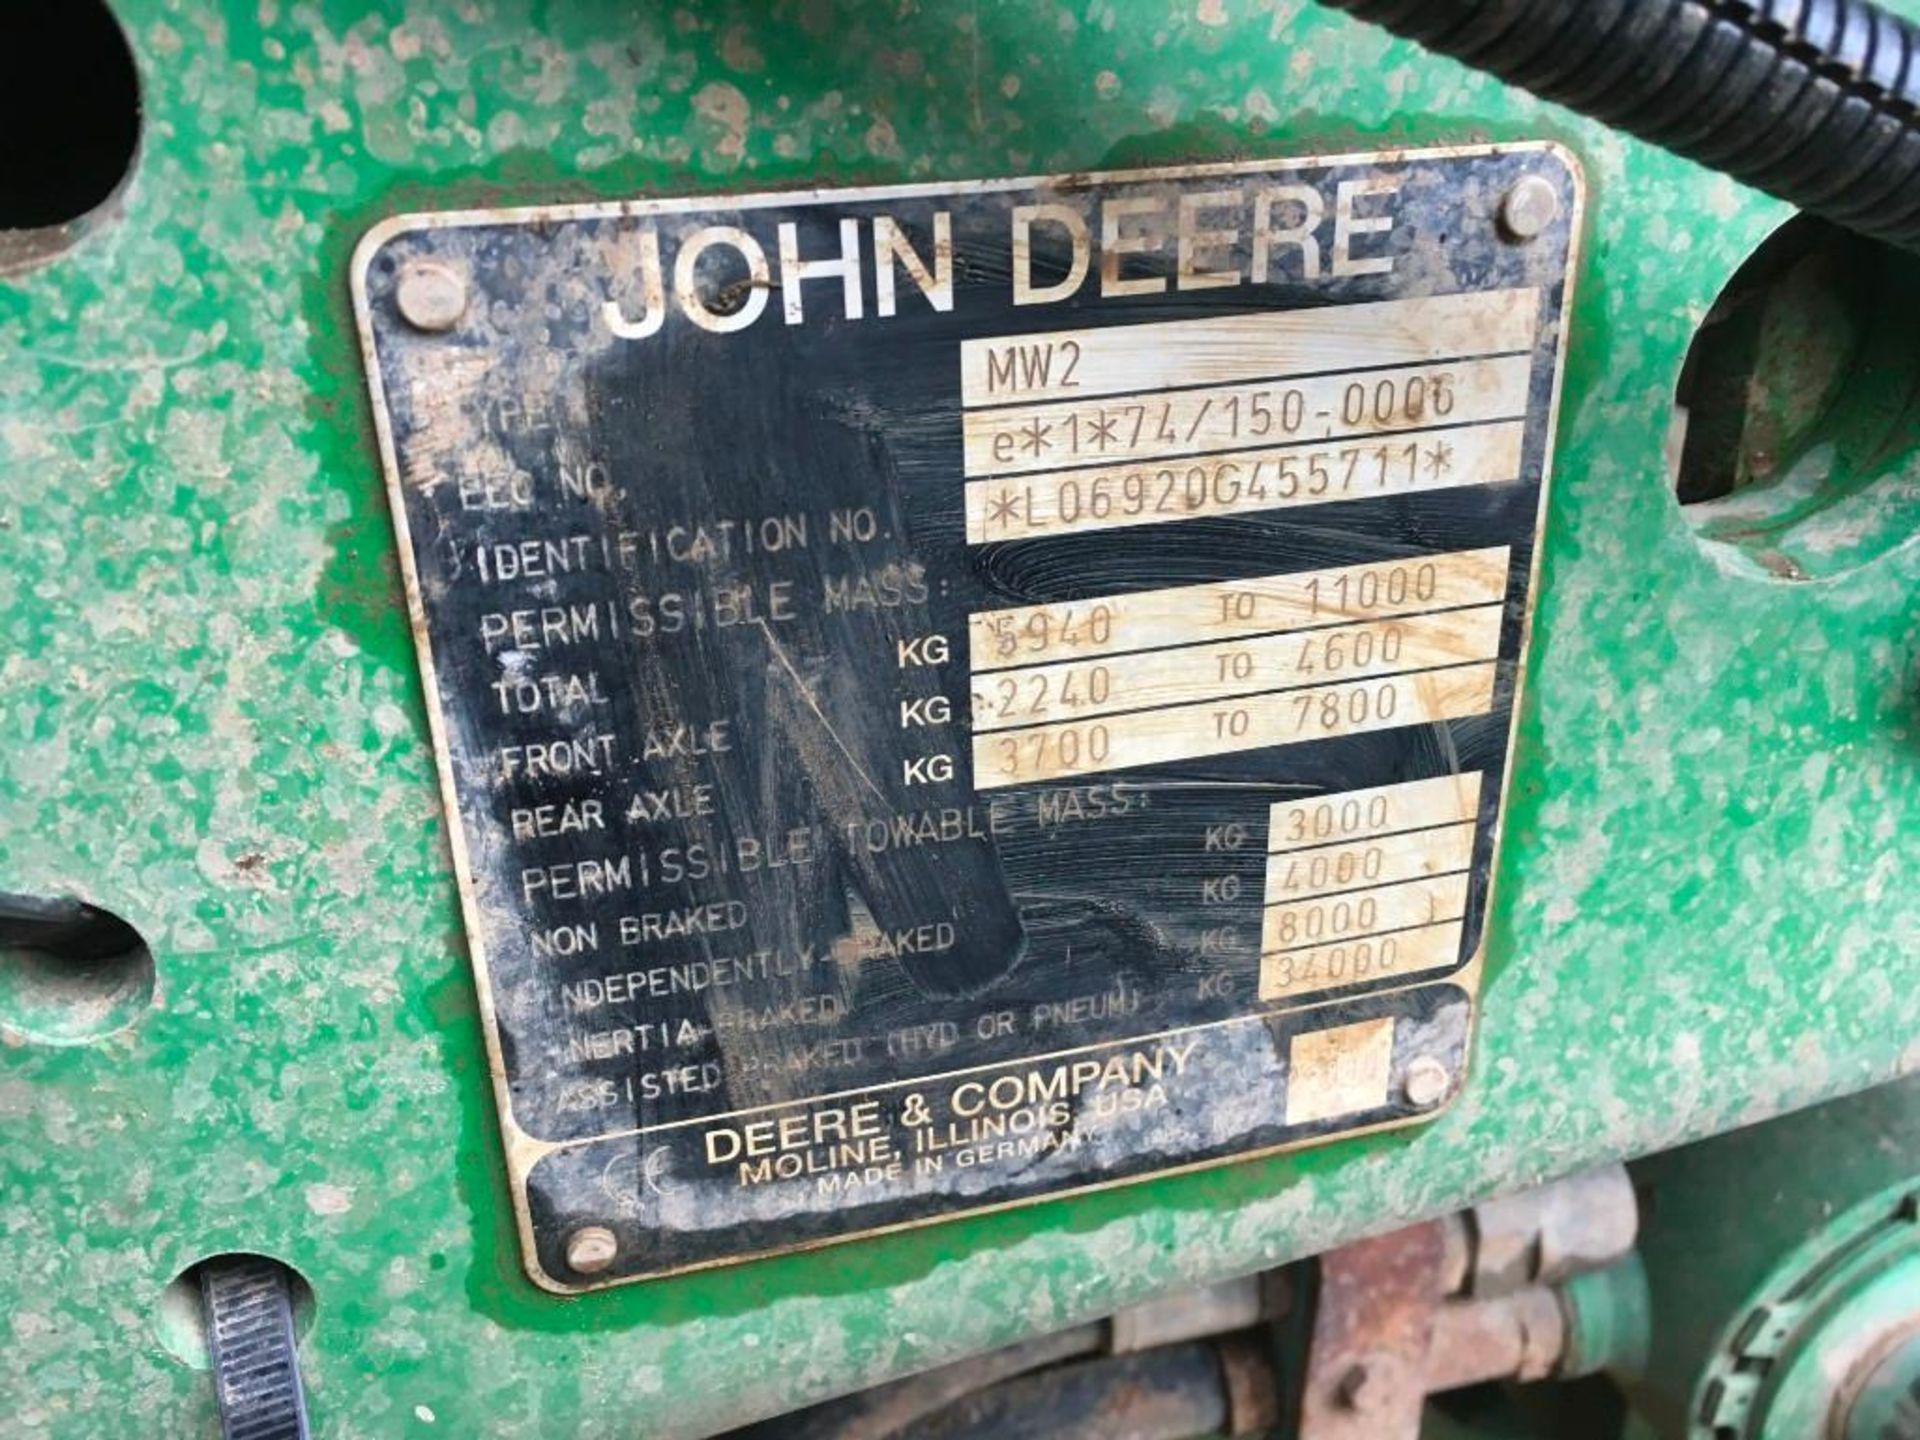 2005 John Deere 6920 40kph tractor with Power Quad gear box, 2 rear spool valves, front and rear lin - Image 9 of 9